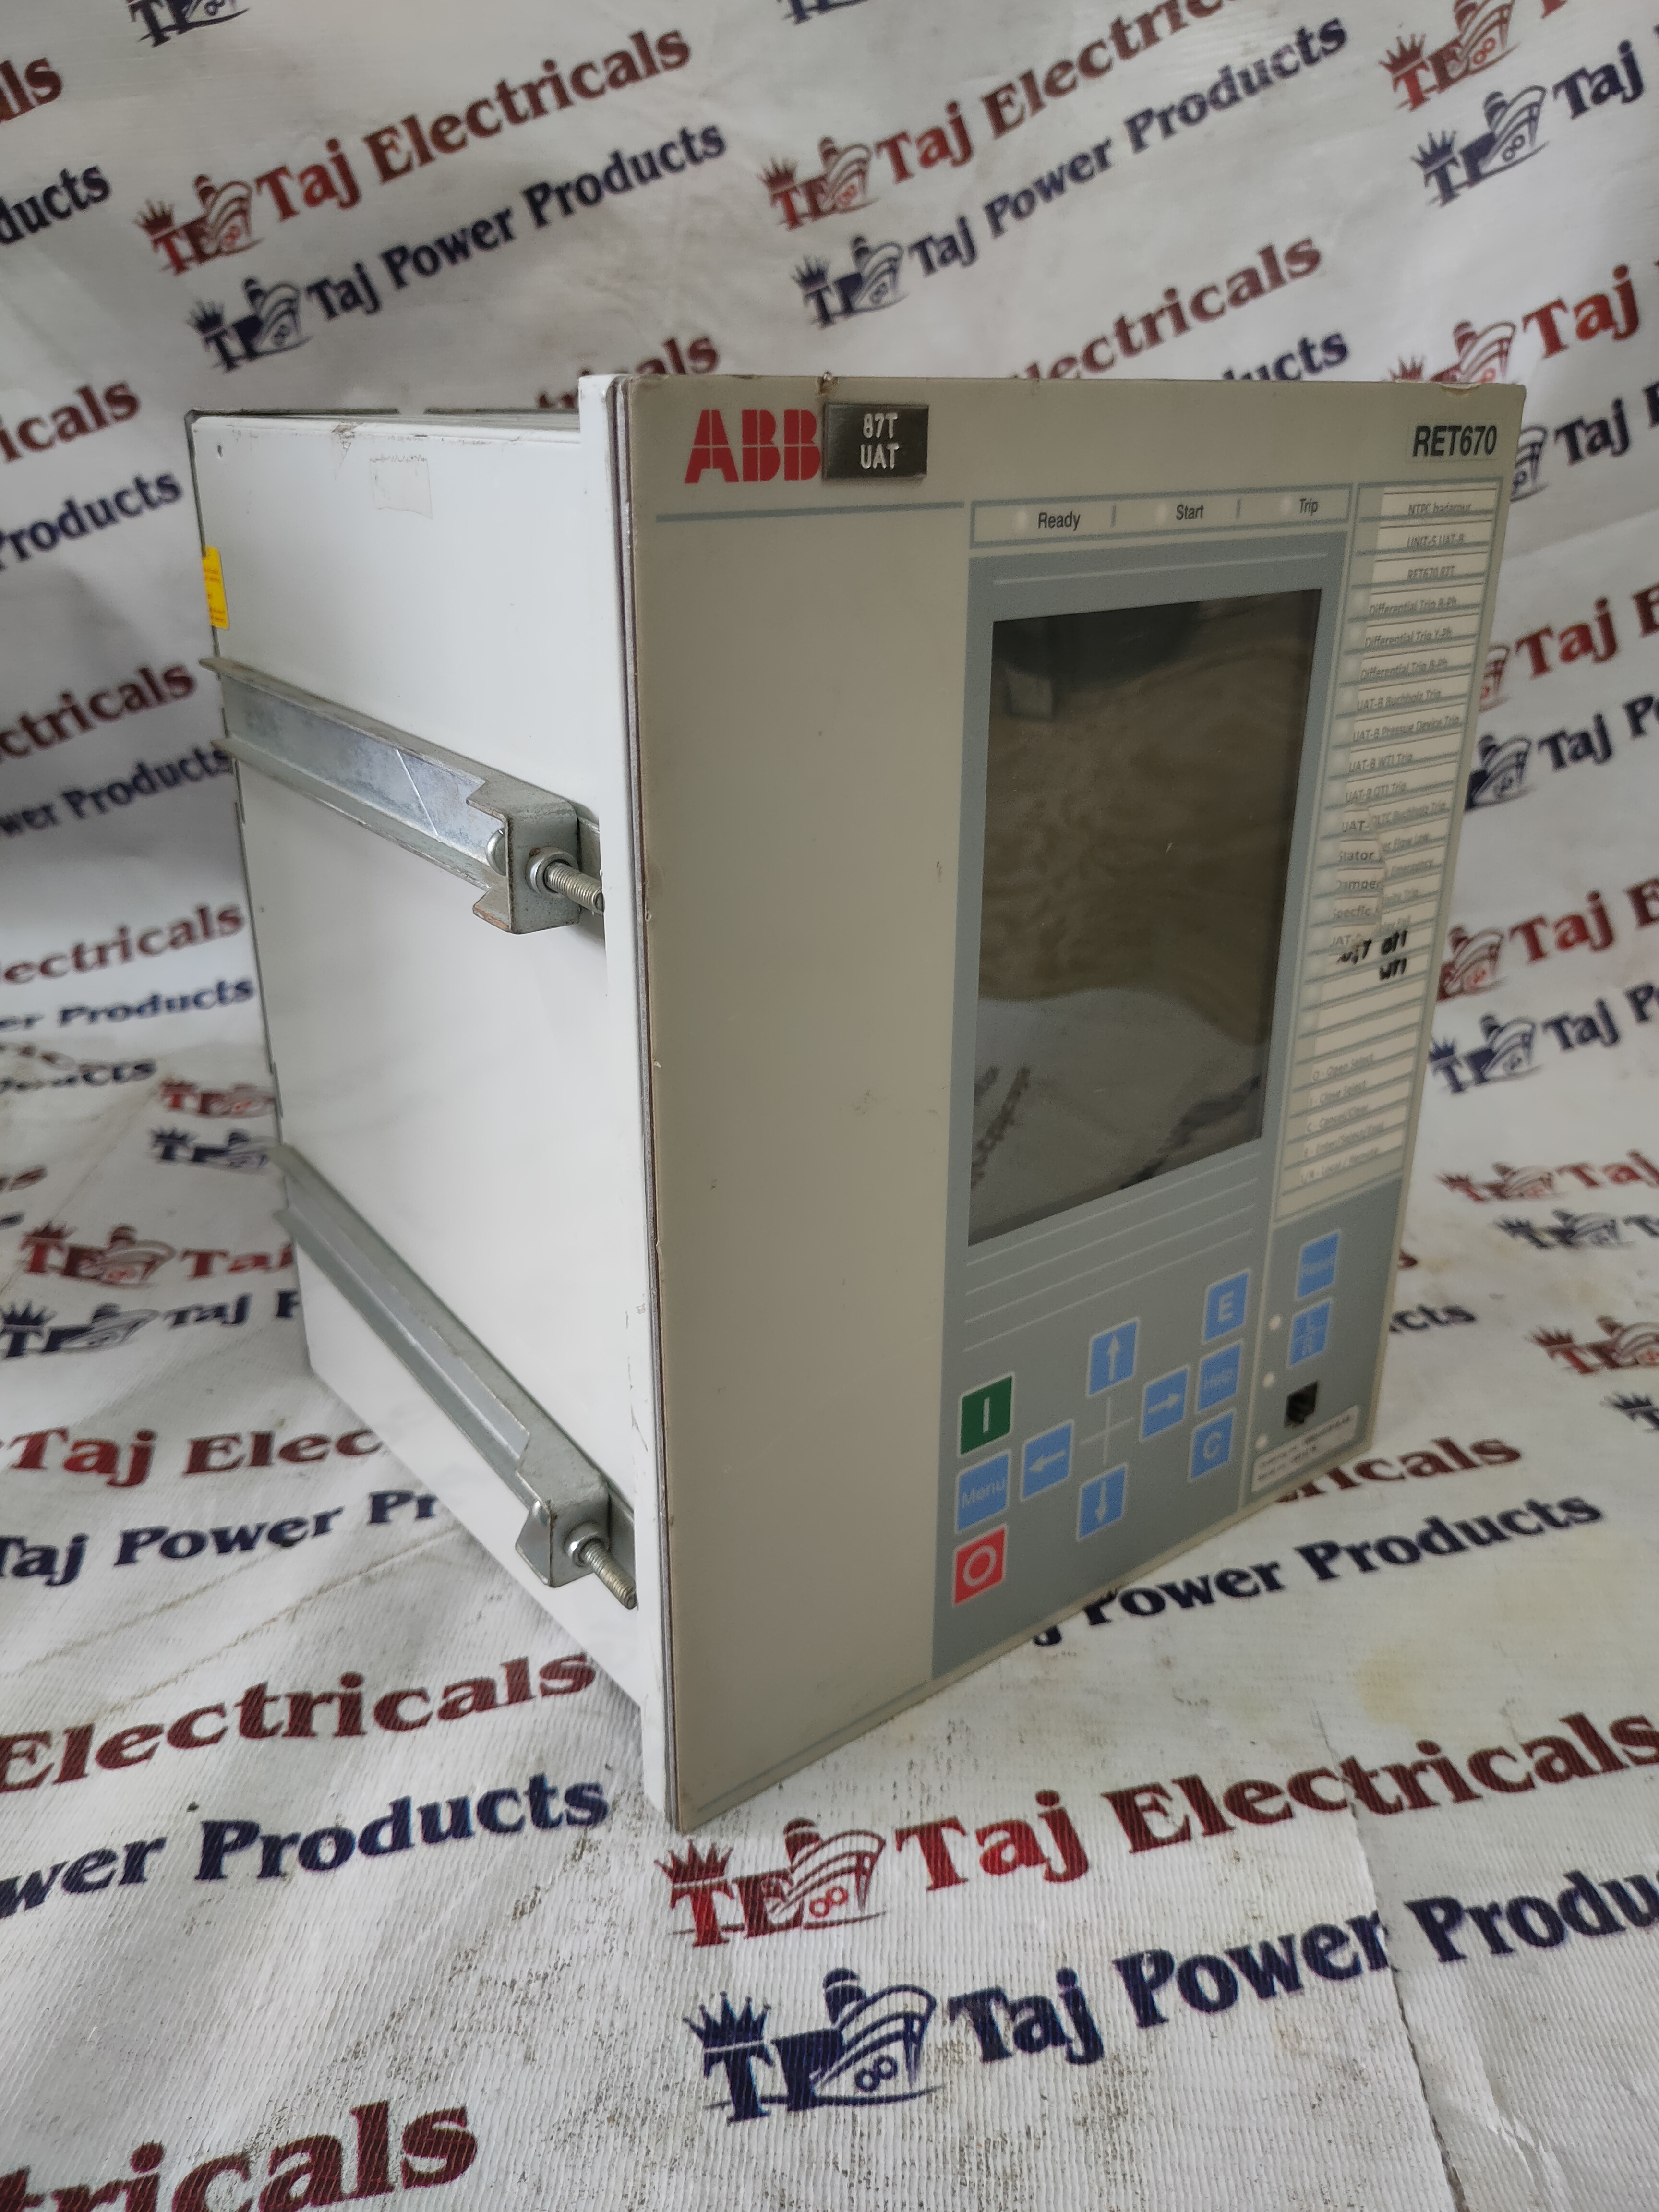 ABB RET6704201173079-10 PROTECTION RELAY